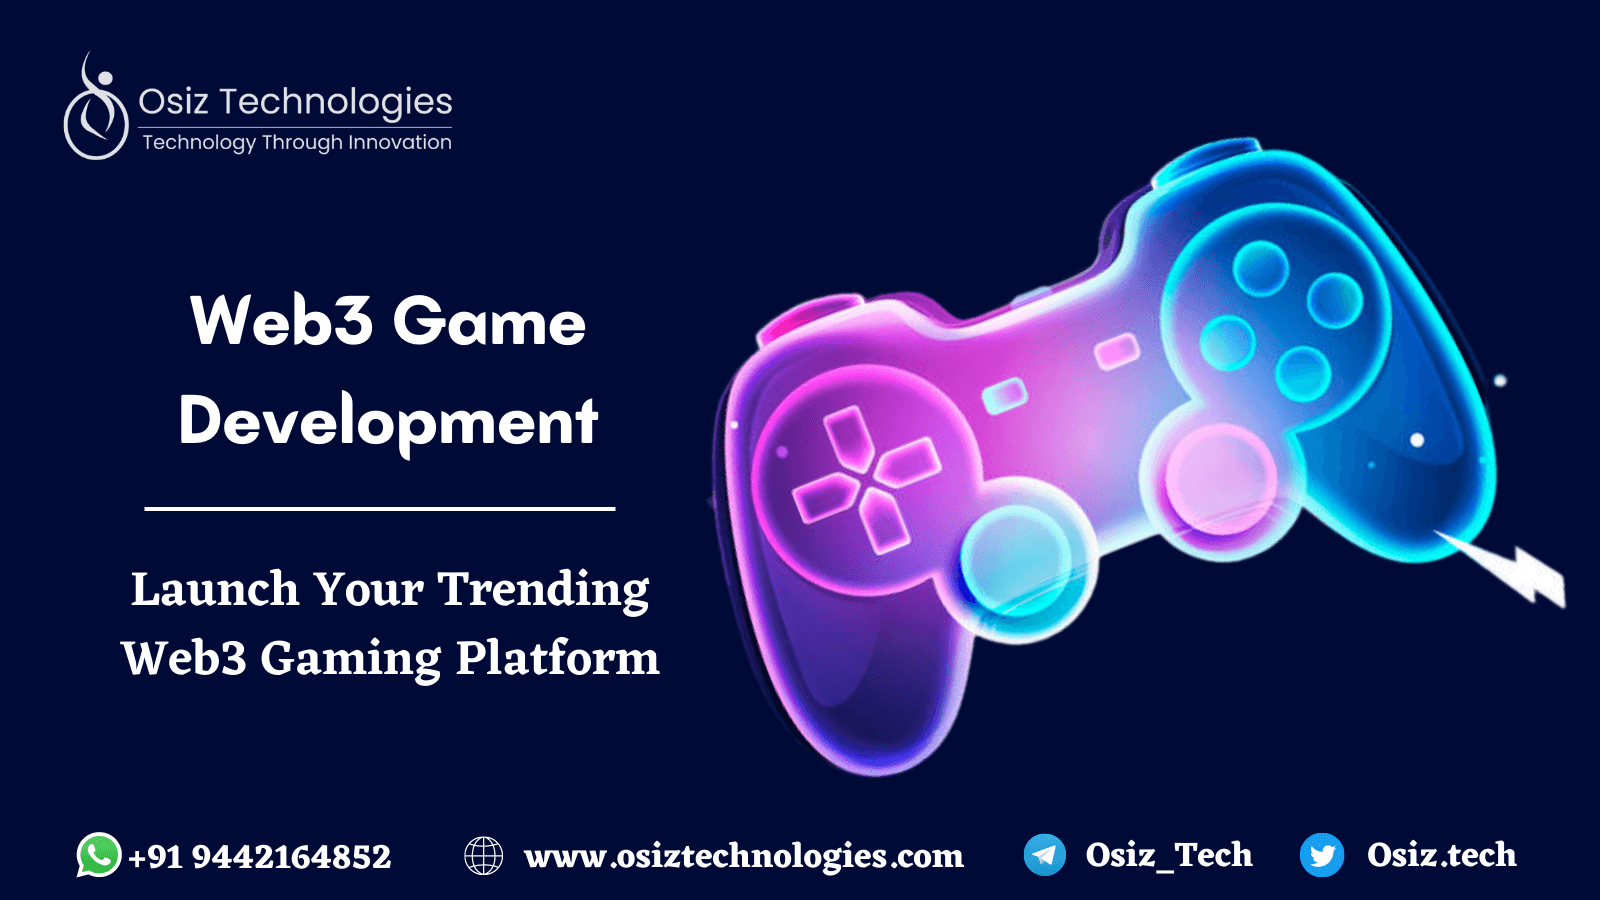 Web3 game development company - To develop Web3 game projects for structured platform in the Crypto Market